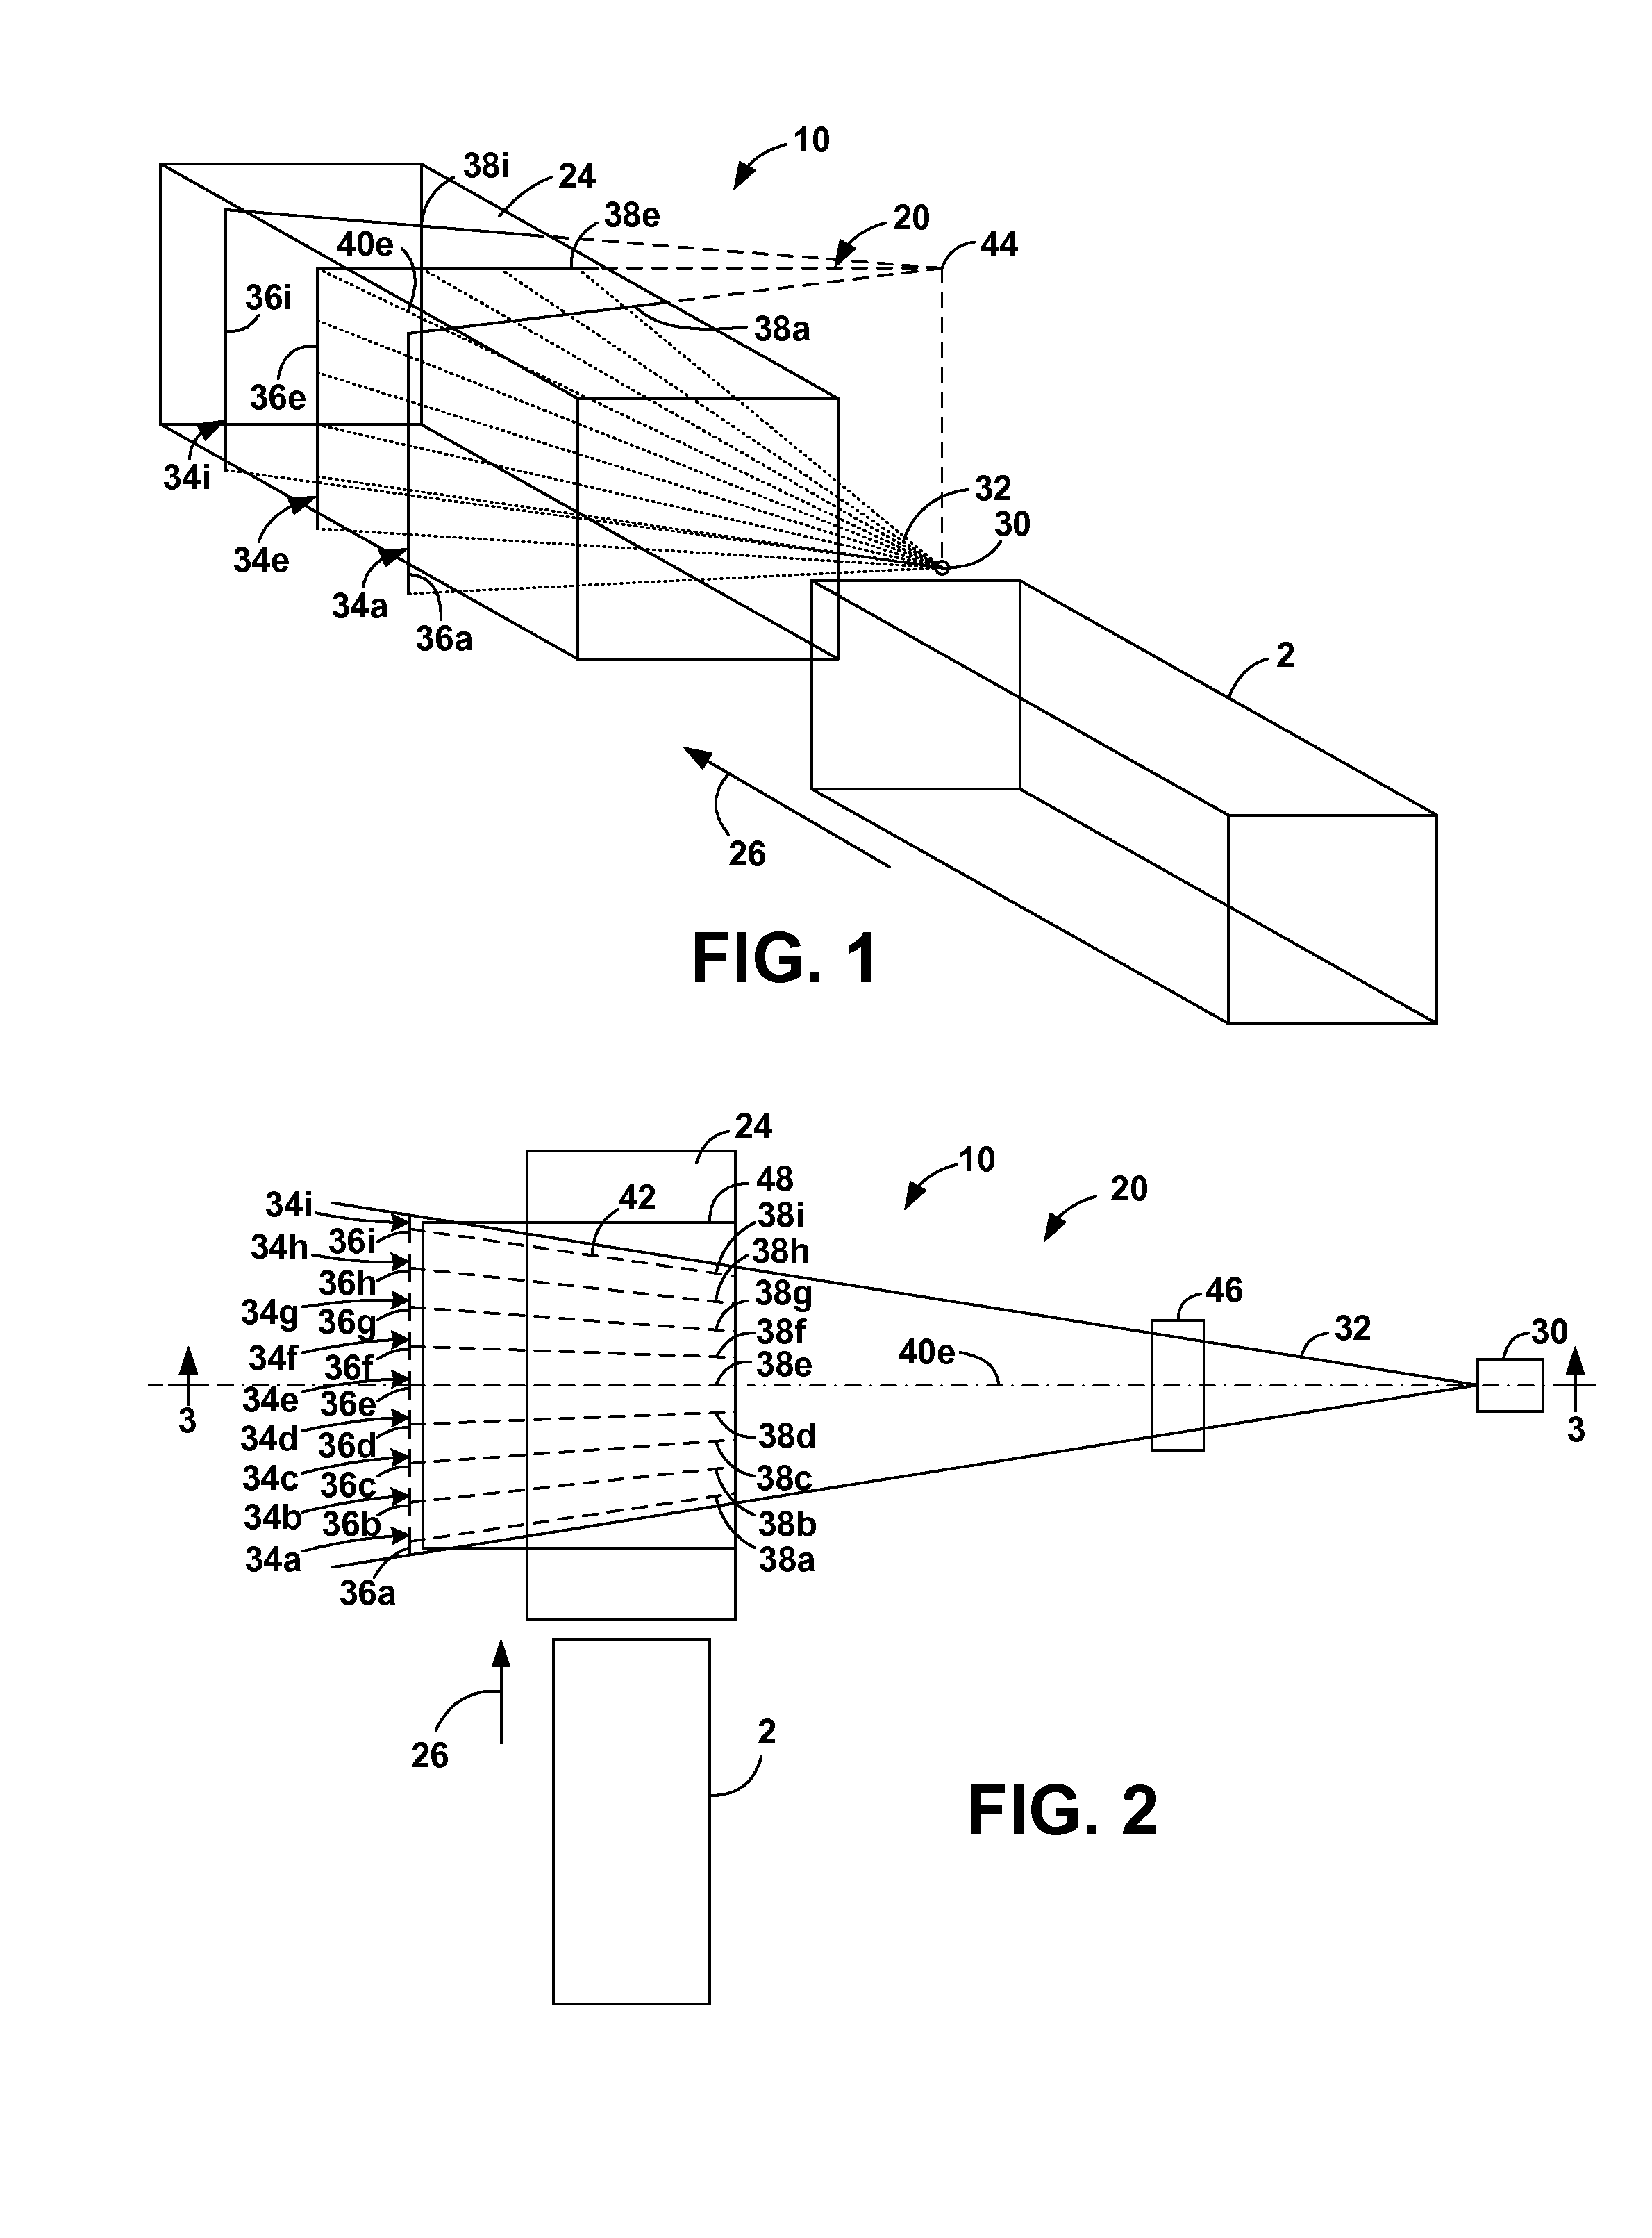 Method for detecting a nuclear weapon in a shipping container or other vehicle using x-rays